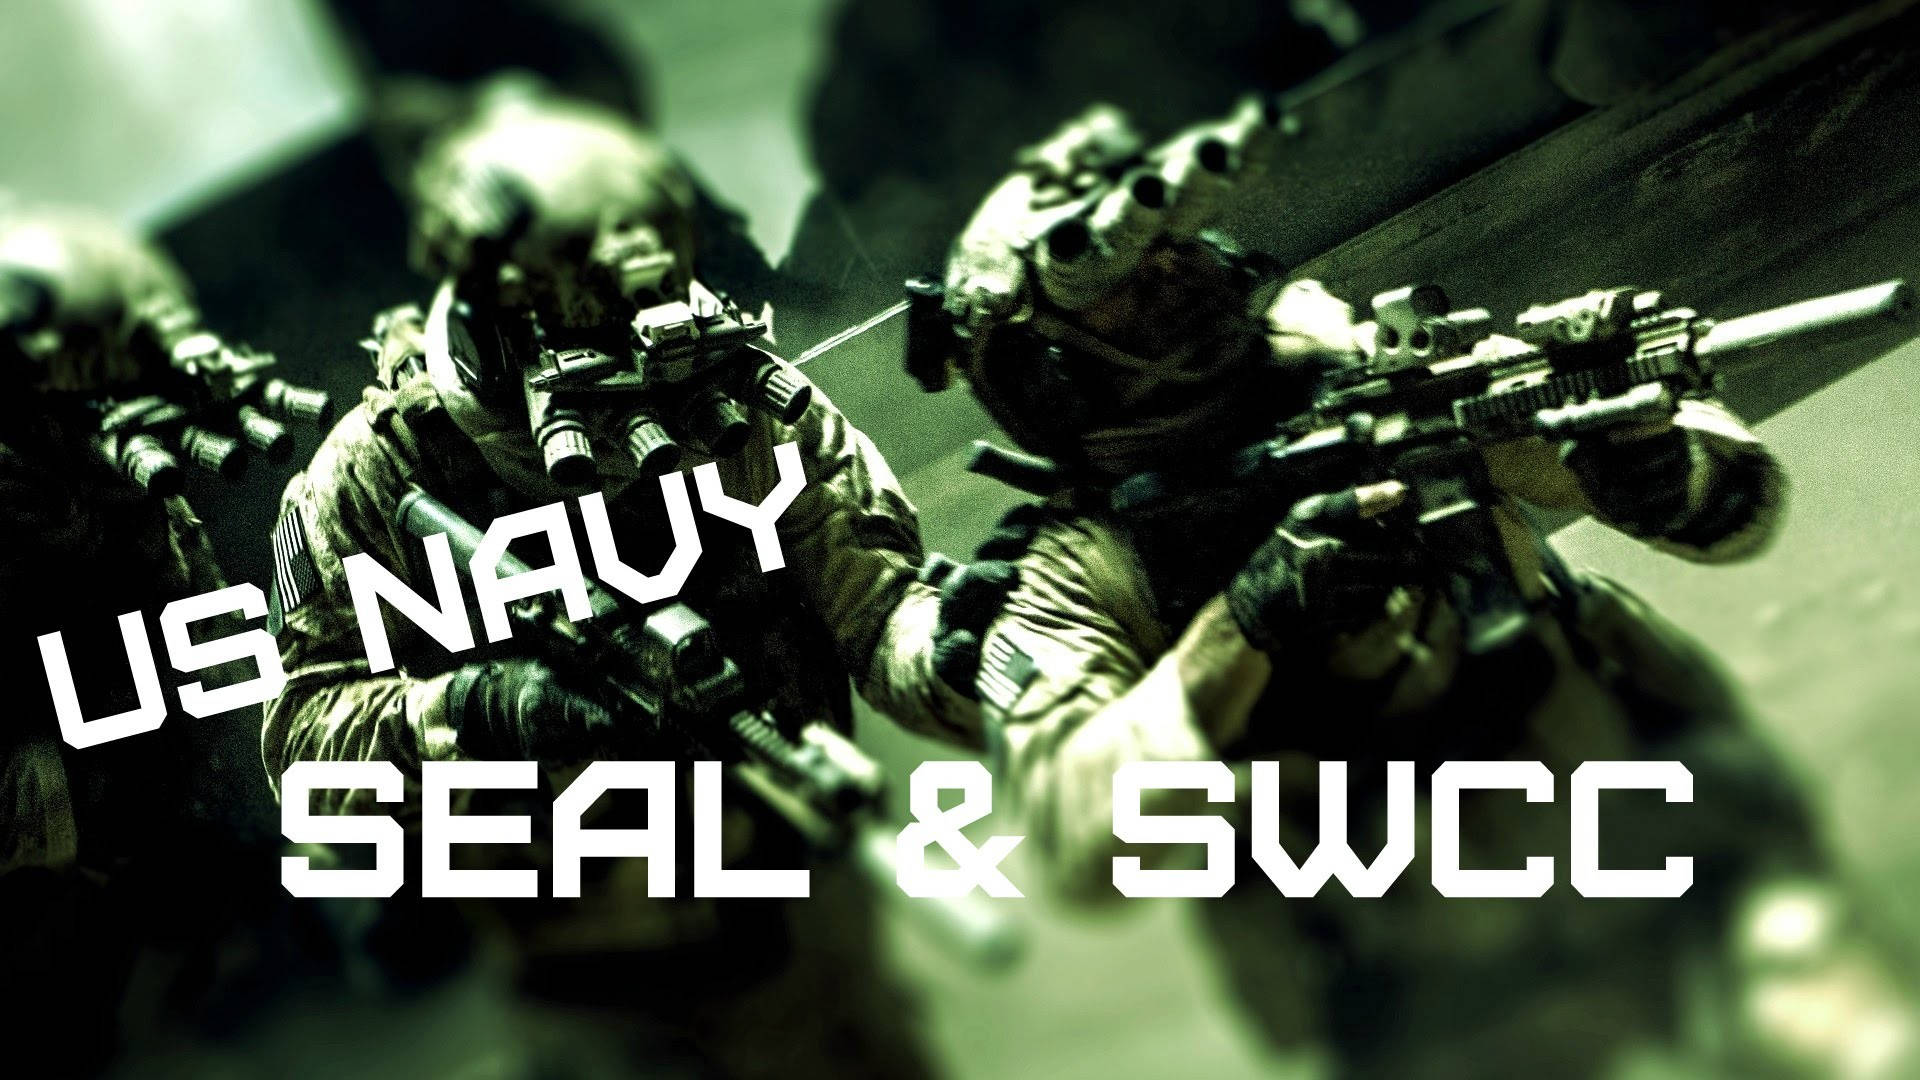 U S Navy Seal And Swcc Soldier Background